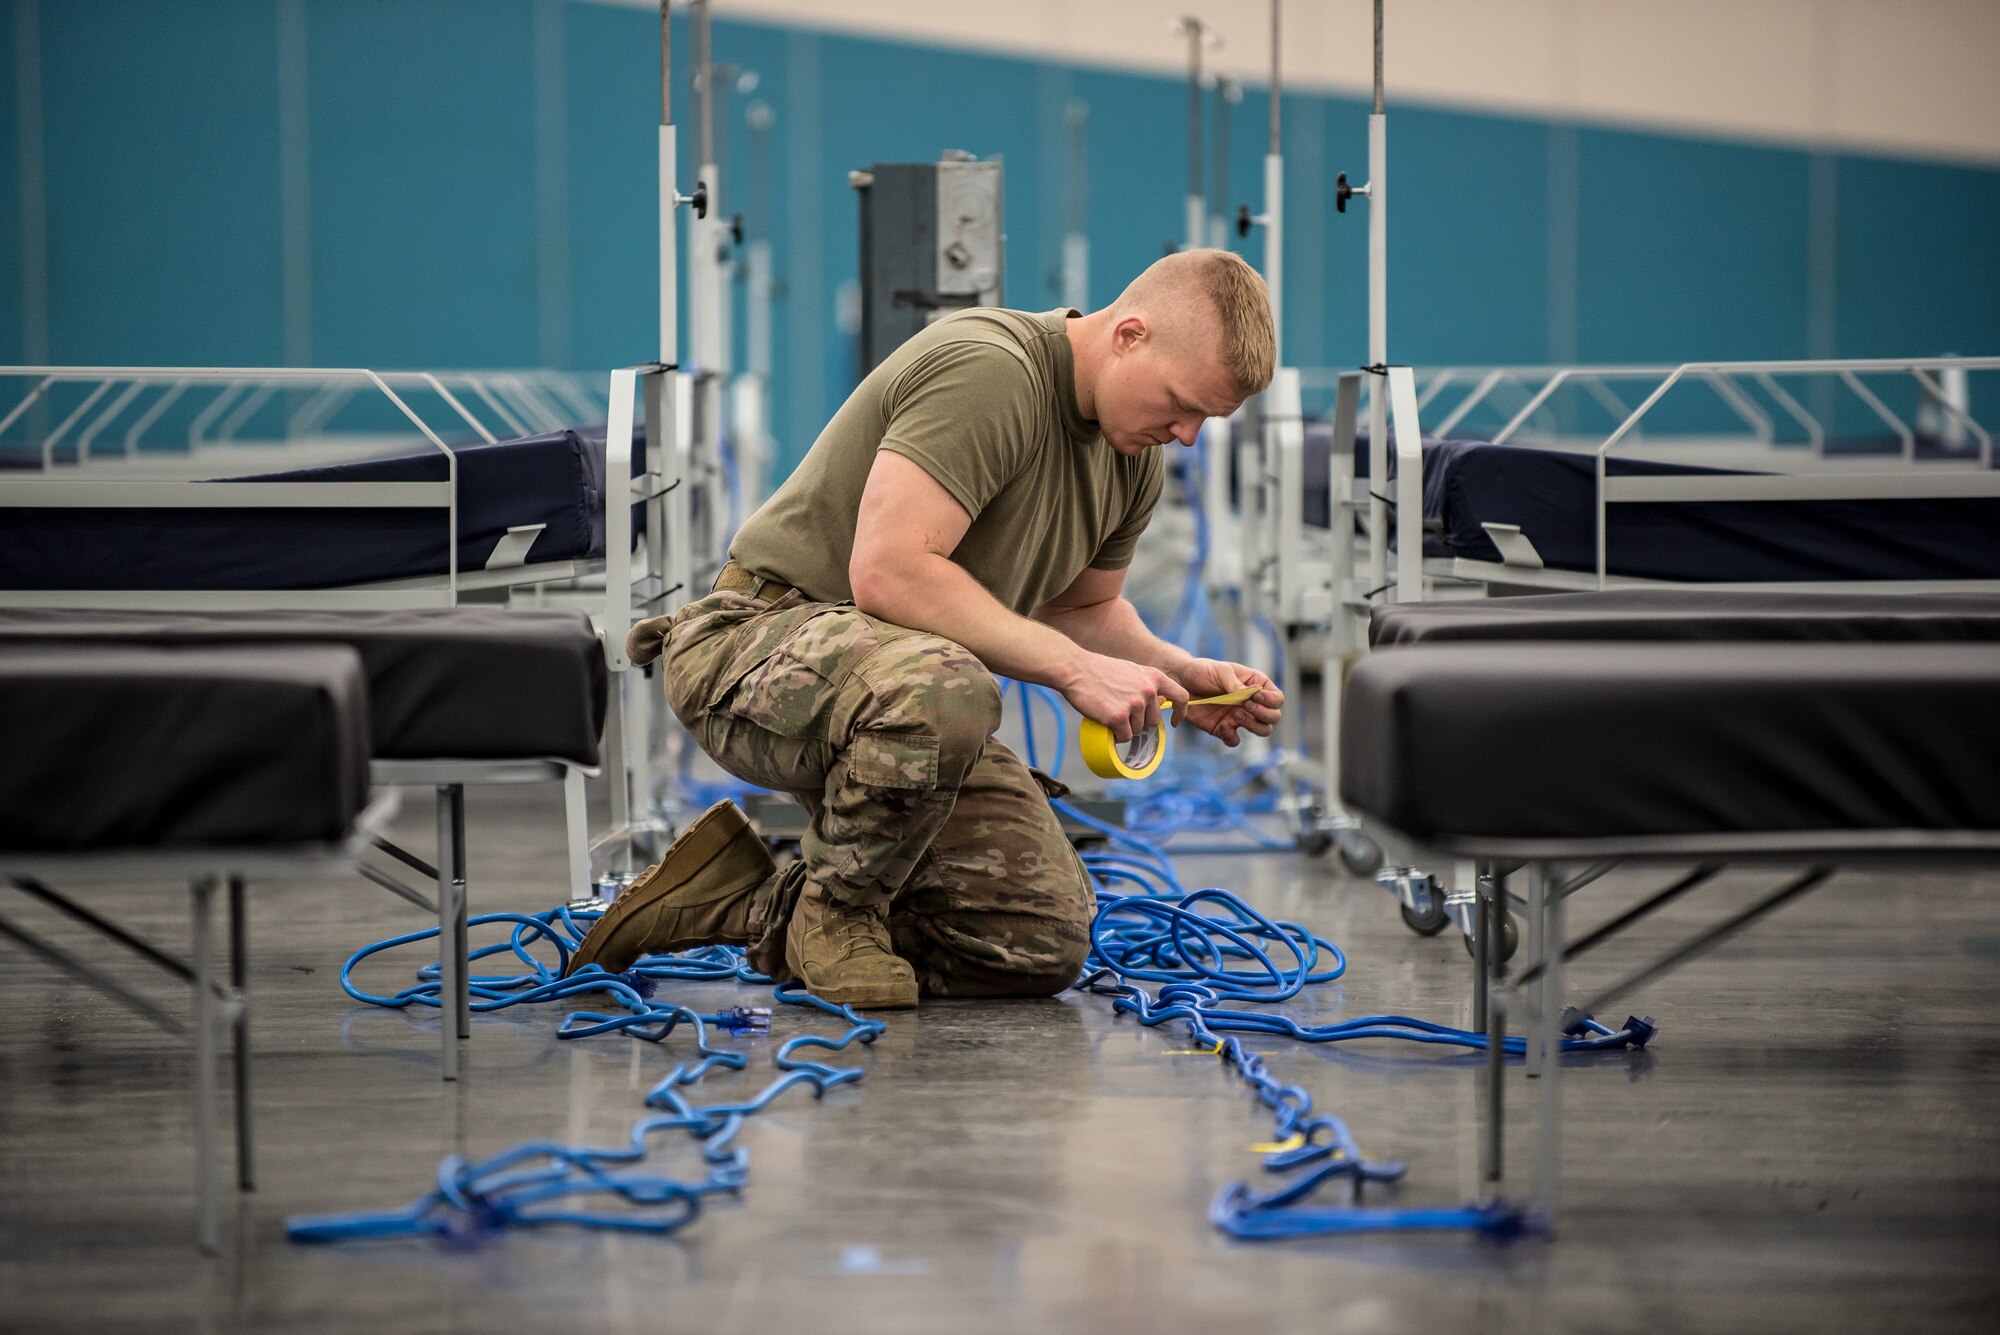 Senior Airman Samuel Wurzelbacher of the Kentucky Air National Guard’s 123rd Civil Engineer Squadron routes electrical wiring for clinical care space at the Kentucky Fair and Exposition Center in Louisville, Ky., April 13, 2020. The site, which is expected to be operational April 15, will serve as an Alternate Care Facility for patients suffering from COVID-19 if area hospitals exceed available capacity. The location initially can treat up to 288 patients and is scalable to 2,000 beds. (U.S. Air National Guard photo by Dale Greer)